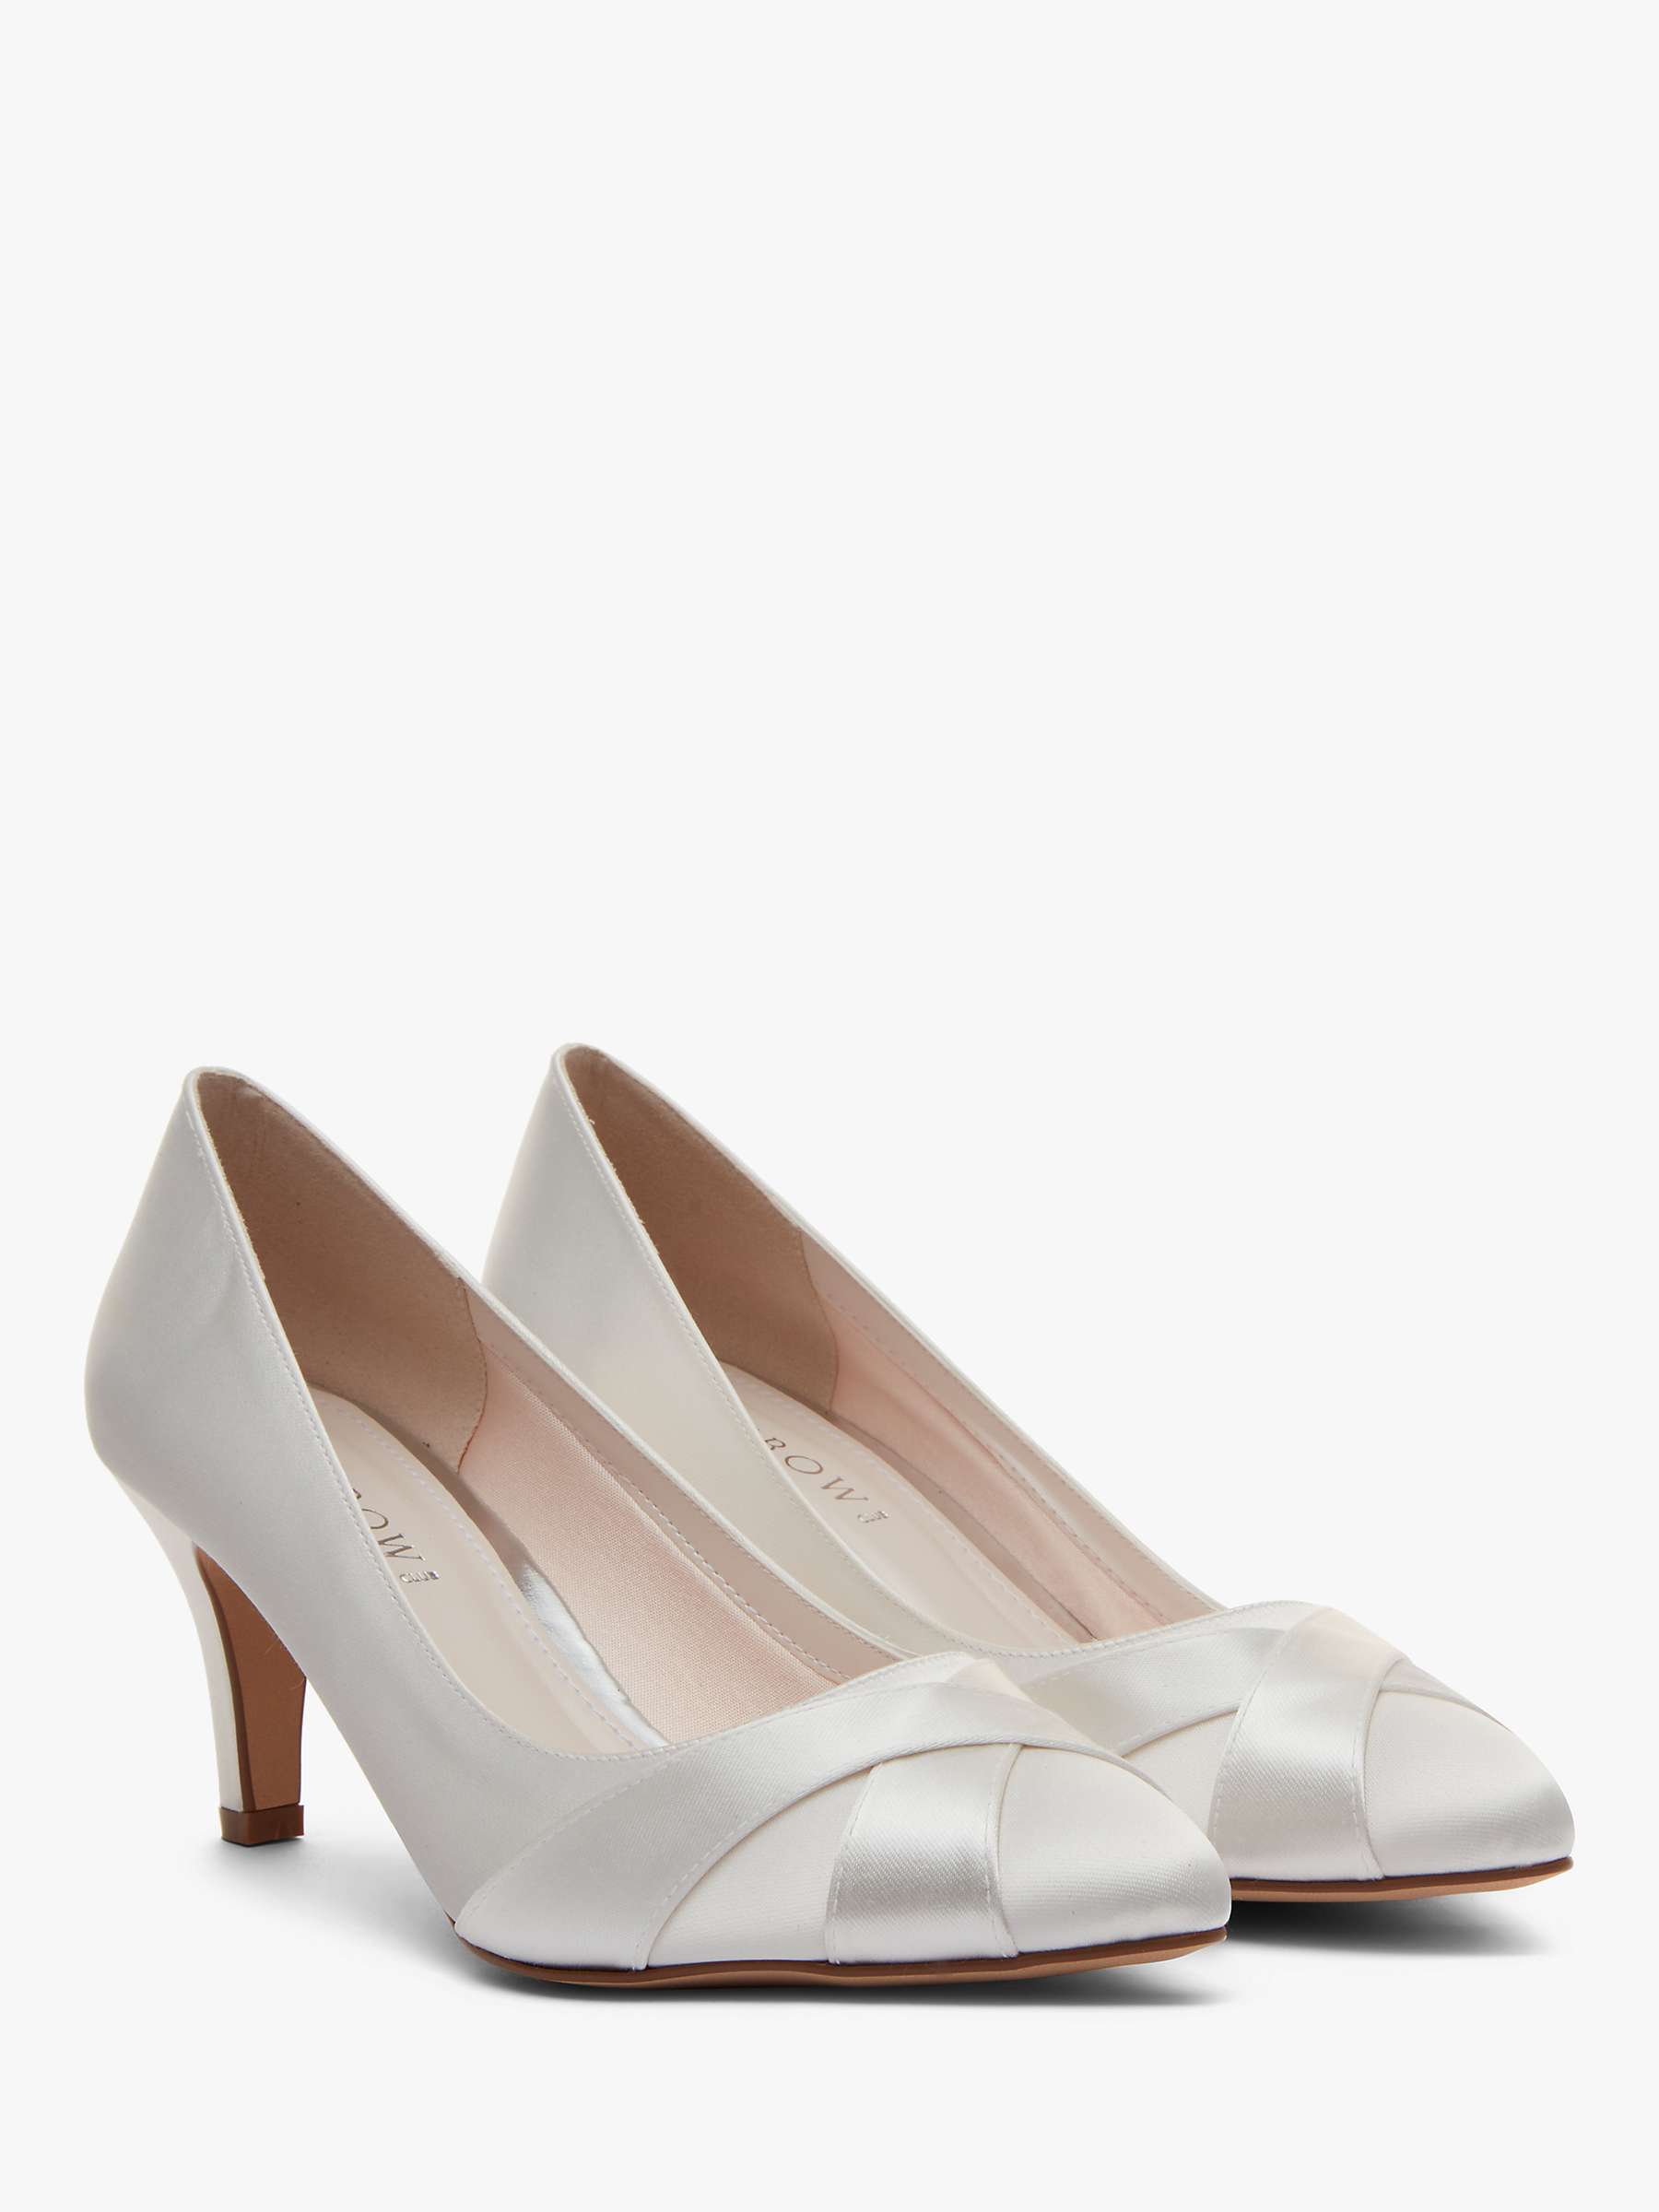 Buy Rainbow Club Lexi Satin Toe Point Court Shoes, Ivory Online at johnlewis.com